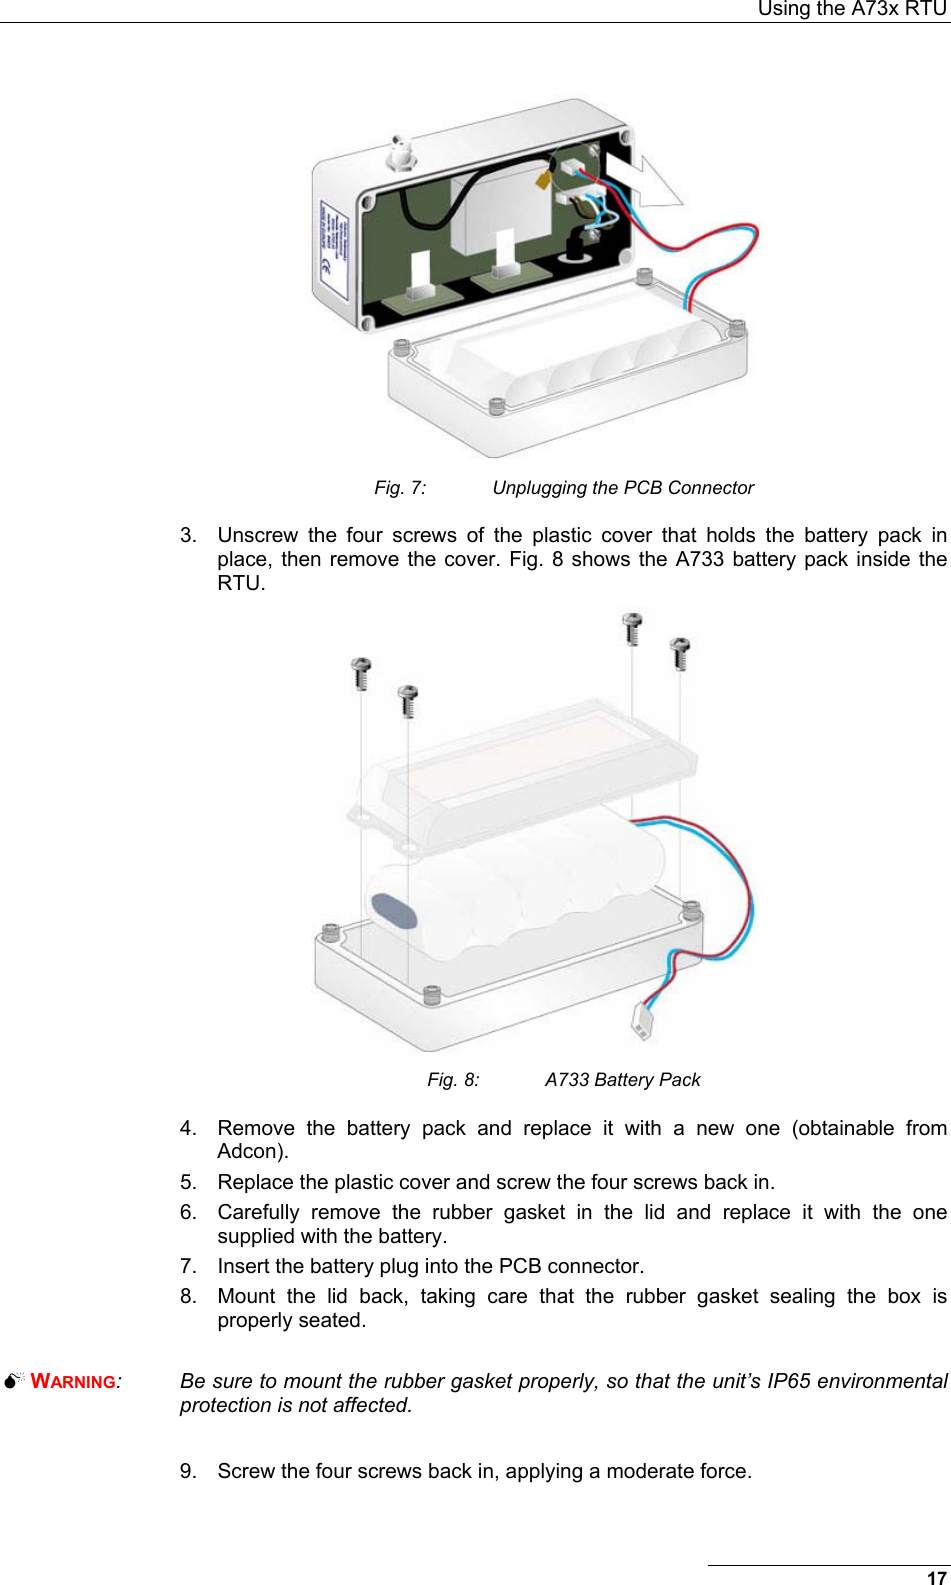  Using the A73x RTU 17  Fig. 7:  Unplugging the PCB Connector 3.  Unscrew the four screws of the plastic cover that holds the battery pack in place, then remove the cover. Fig. 8 shows the A733 battery pack inside the RTU.  Fig. 8:  A733 Battery Pack 4.  Remove the battery pack and replace it with a new one (obtainable from Adcon). 5.  Replace the plastic cover and screw the four screws back in. 6.  Carefully remove the rubber gasket in the lid and replace it with the one supplied with the battery.  7.  Insert the battery plug into the PCB connector. 8.  Mount the lid back, taking care that the rubber gasket sealing the box is properly seated.   WARNING:  Be sure to mount the rubber gasket properly, so that the unit’s IP65 environmental protection is not affected.  9.  Screw the four screws back in, applying a moderate force. 